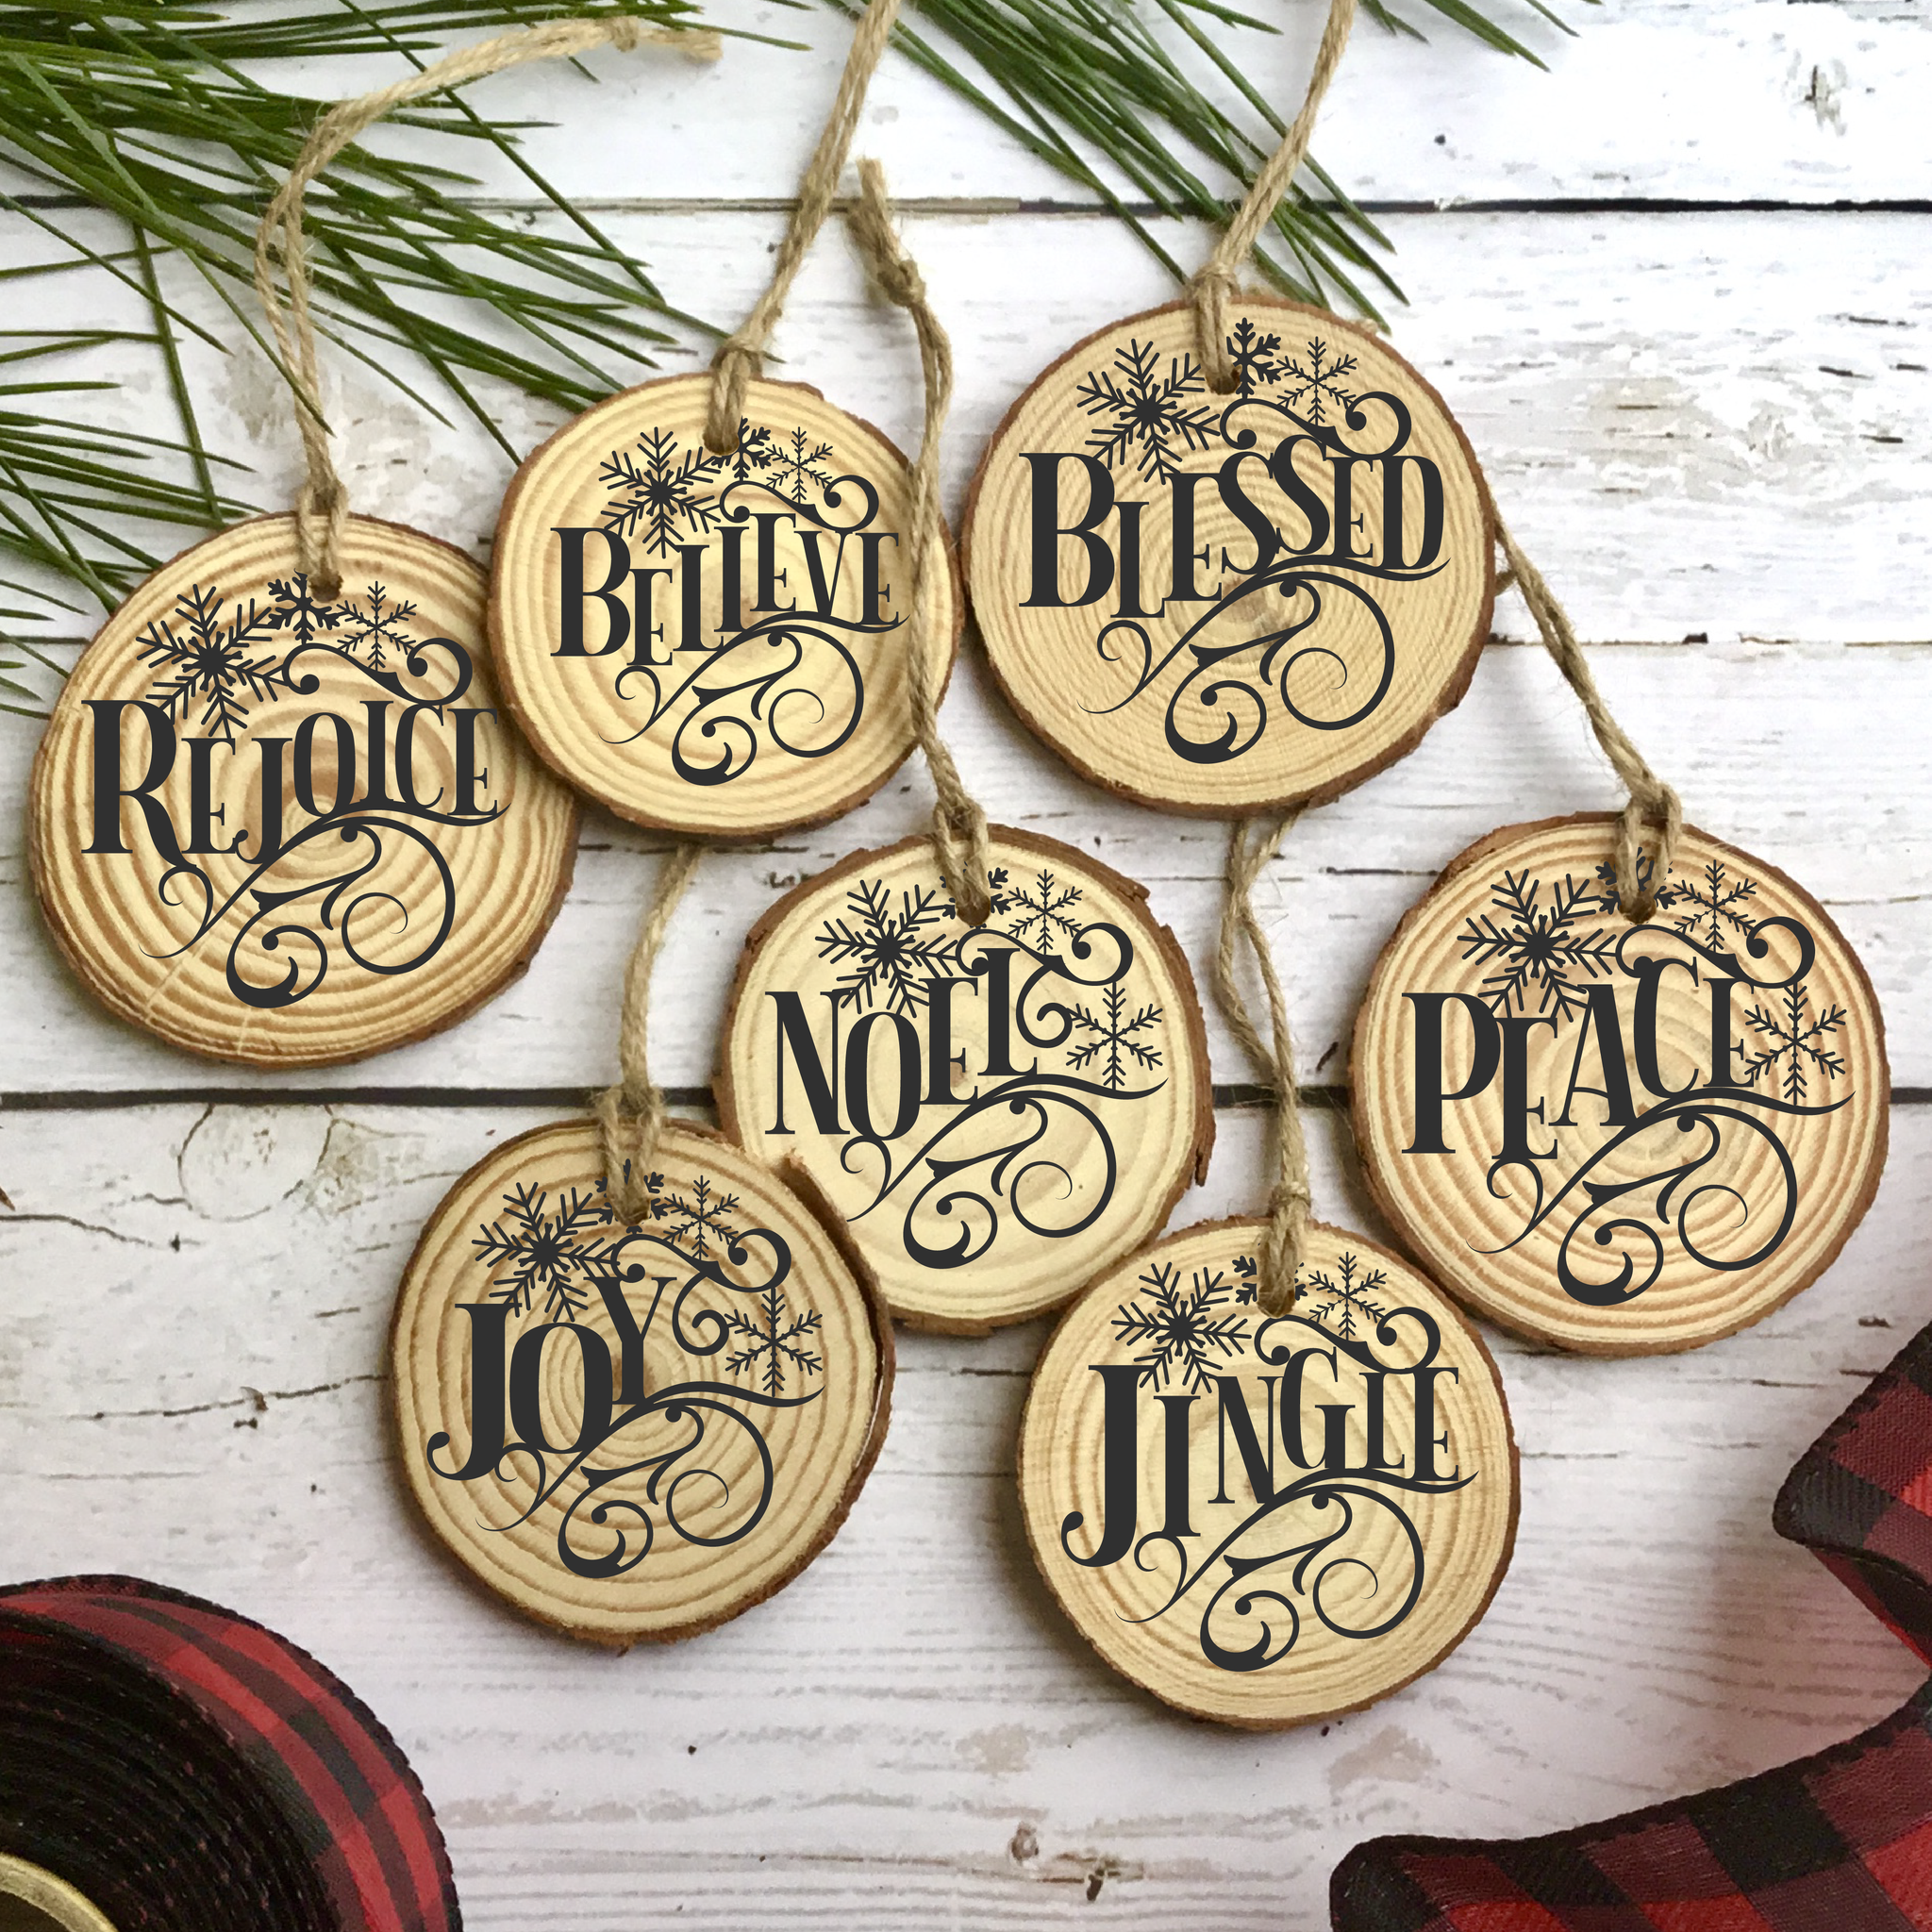 Buy Christmas Ornaments Set, Christmas Decorations, Clearance